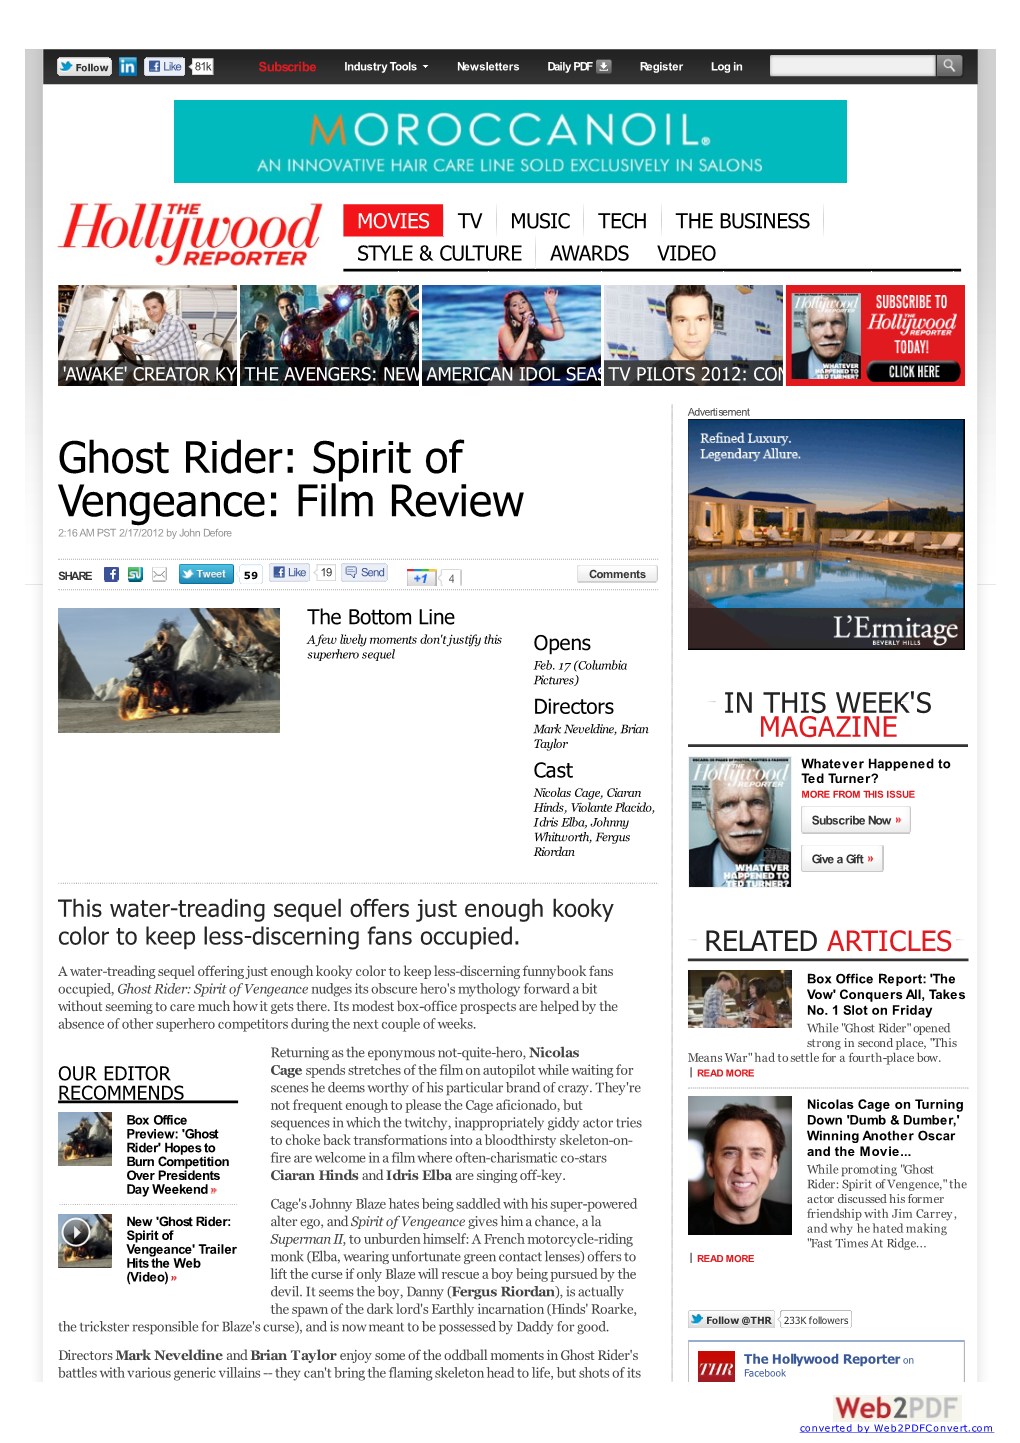 Ghost Rider: Spirit of Vengeance: Film Review 2:16 AM PST 2/17/2012 by John Defore